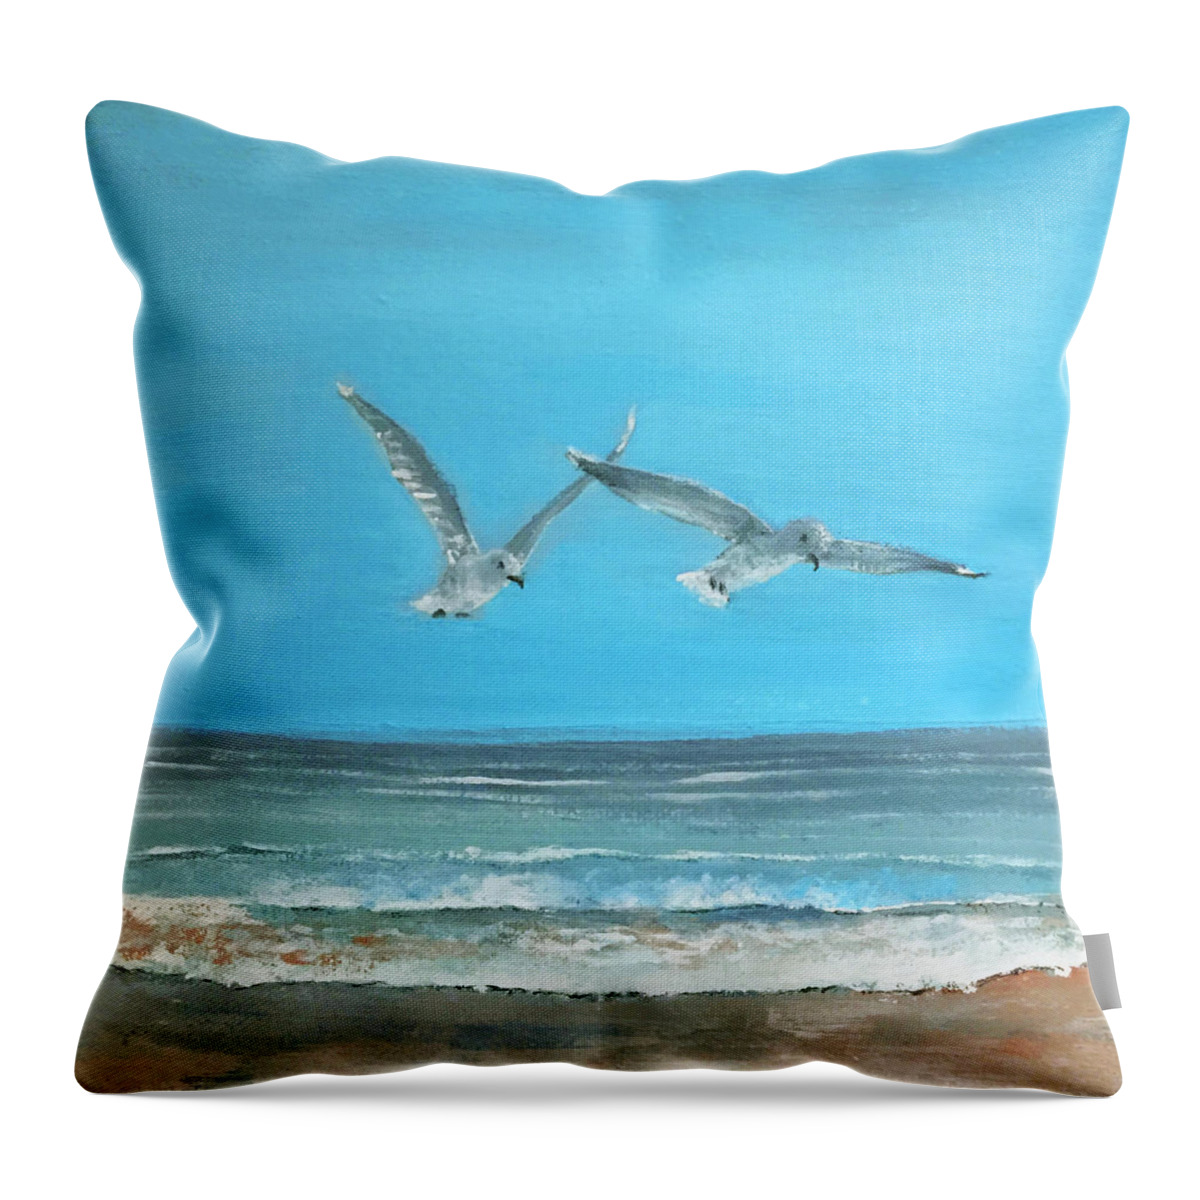  Throw Pillow featuring the painting Beach Buddies by Linda Bailey